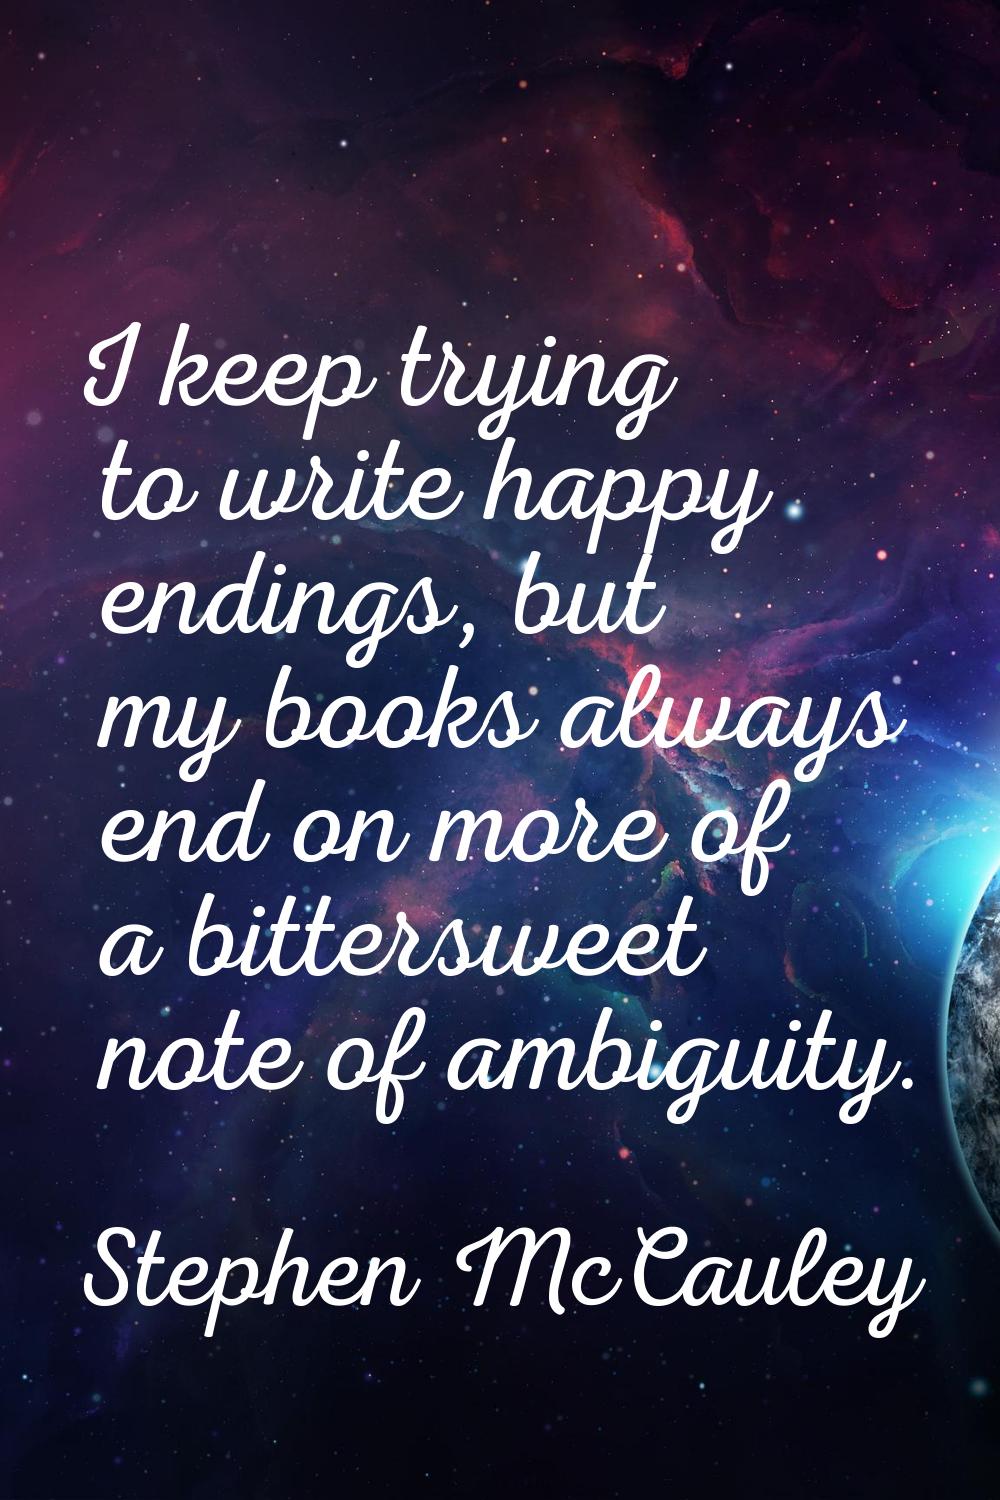 I keep trying to write happy endings, but my books always end on more of a bittersweet note of ambi